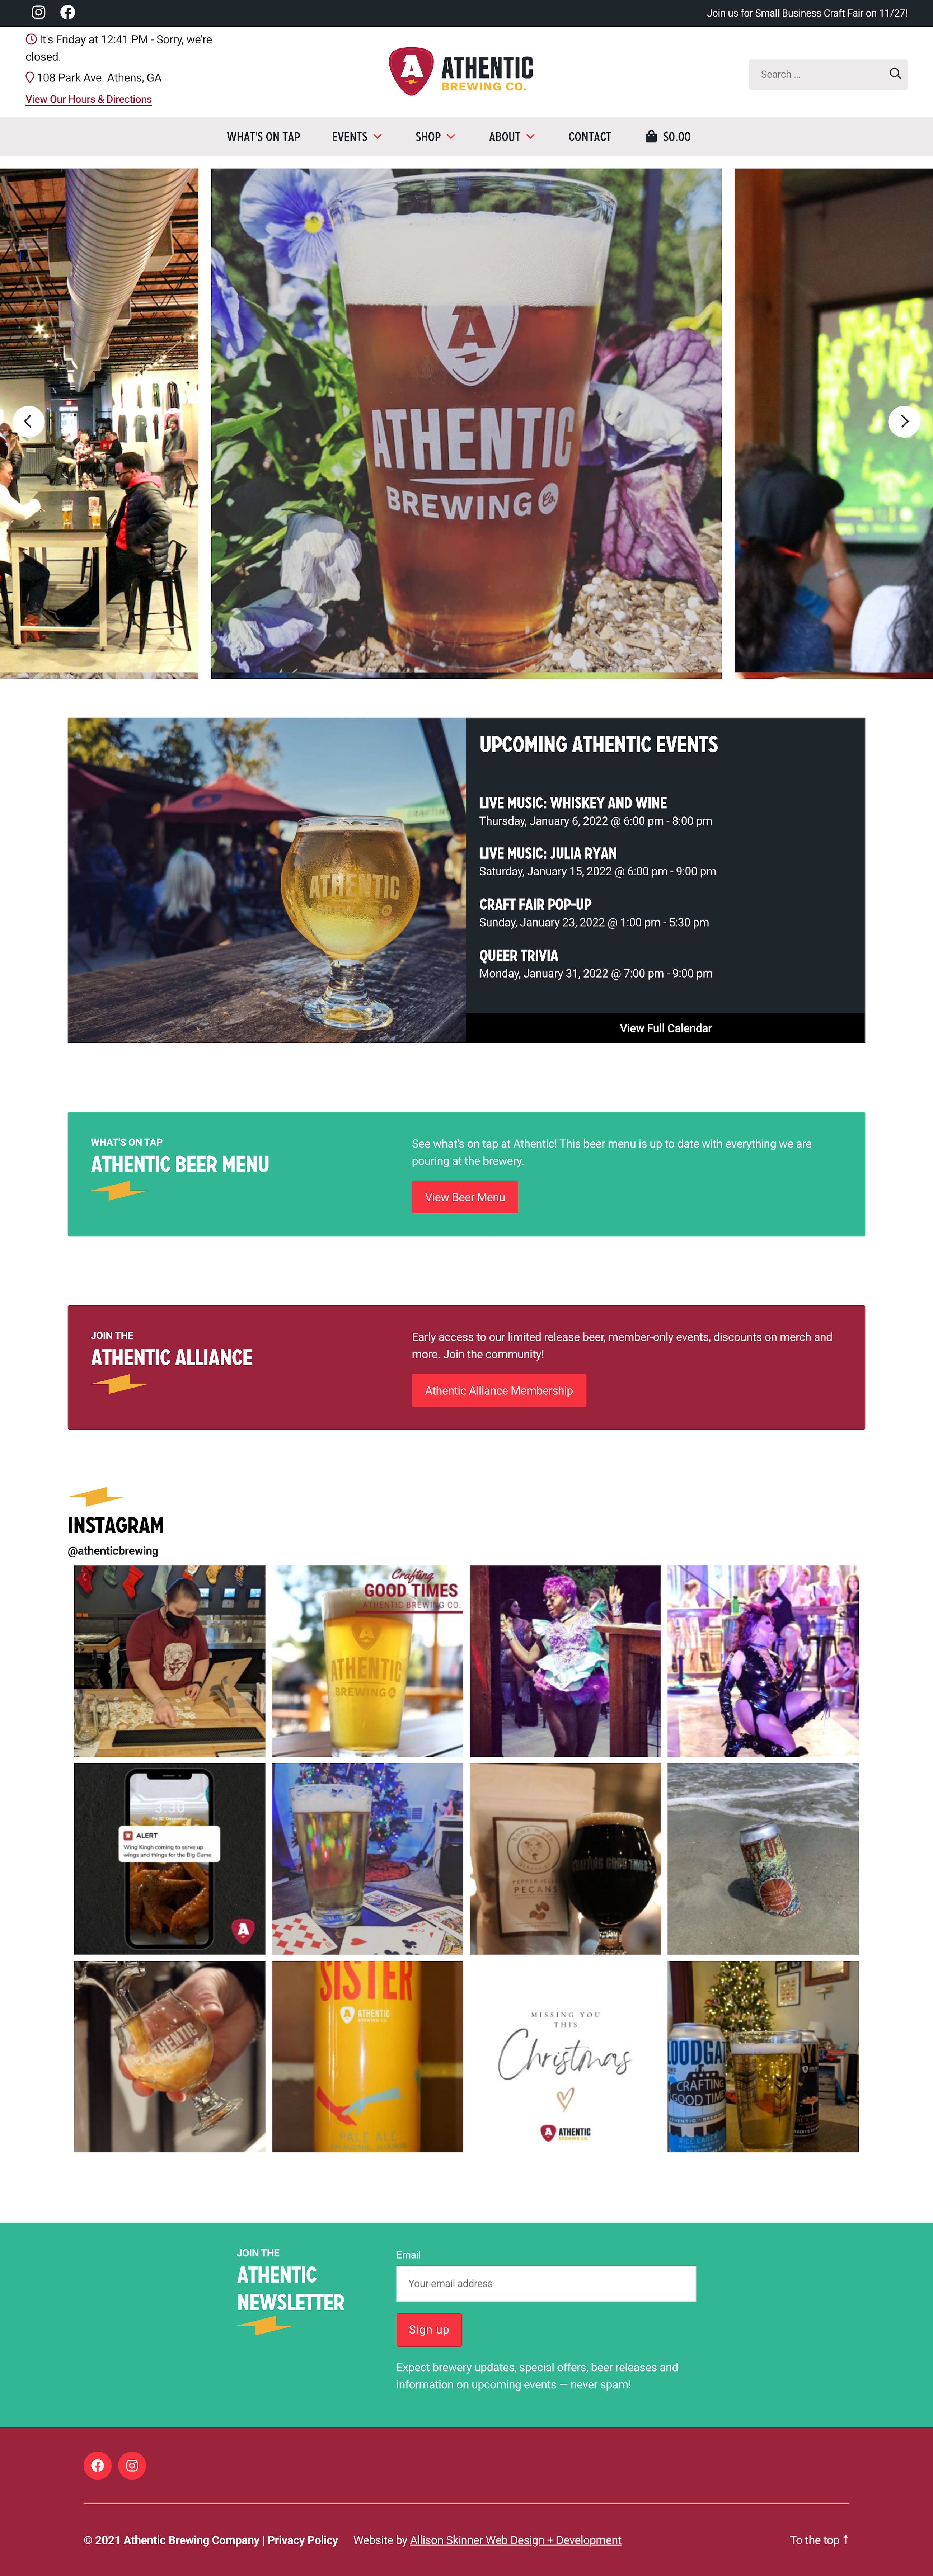 Athentic Brewing homepage